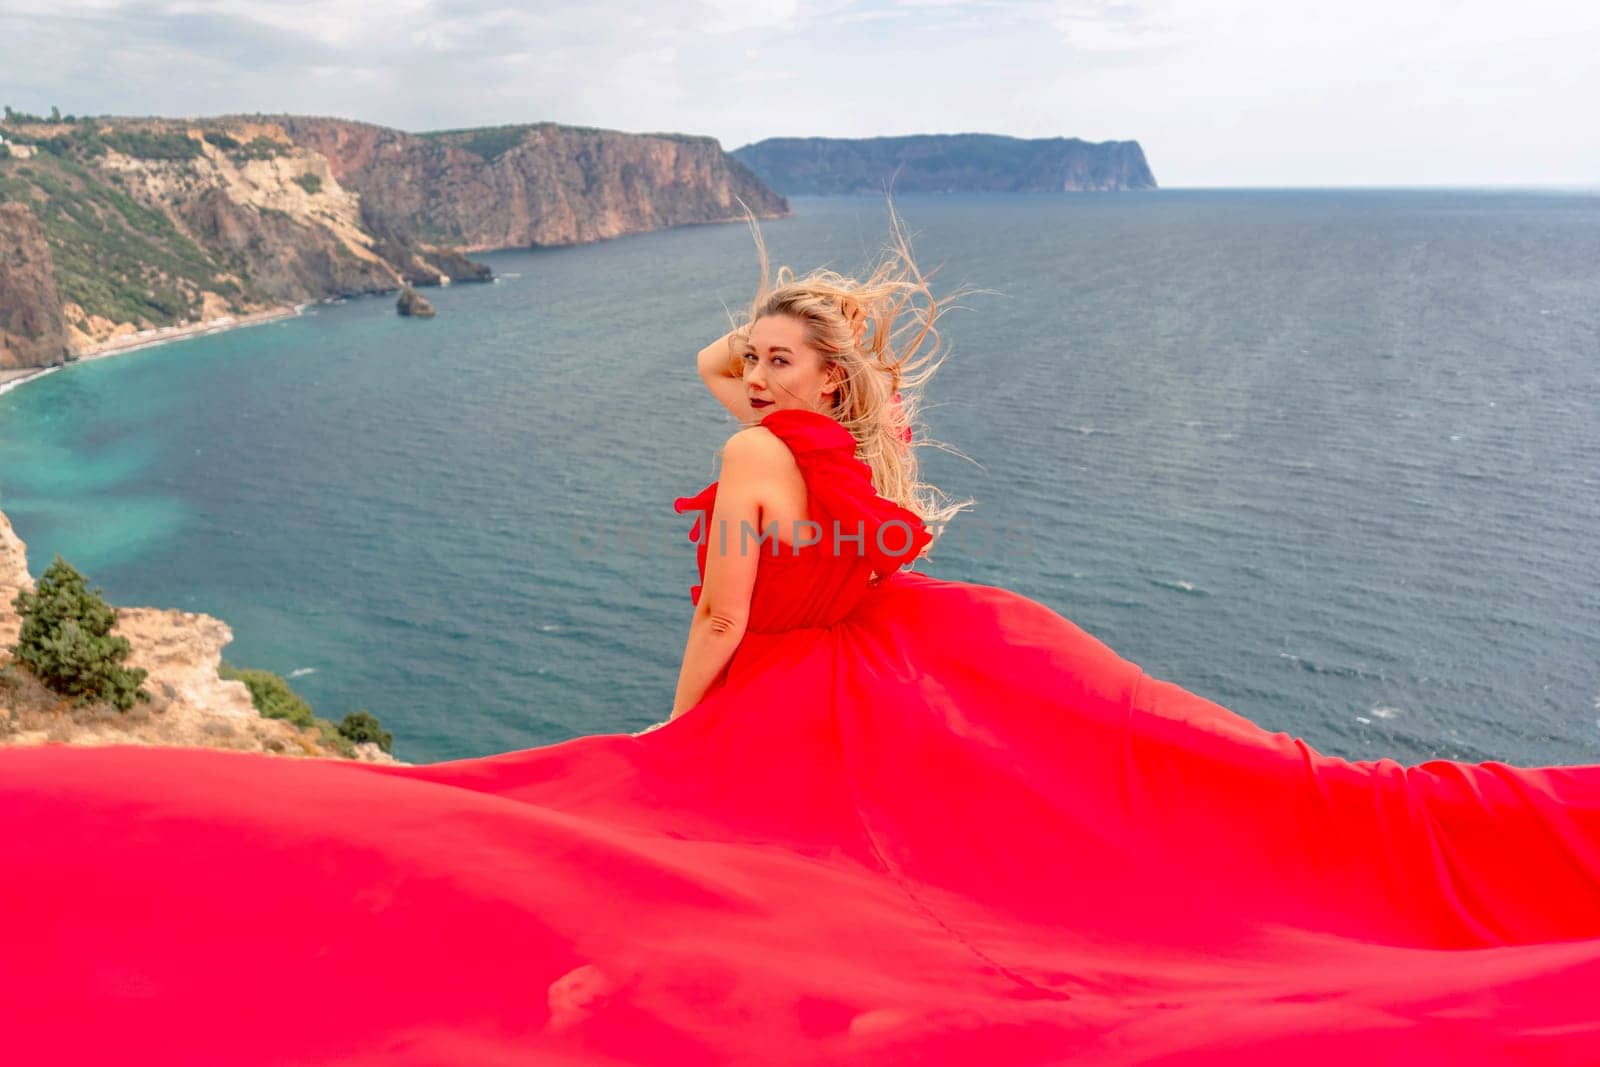 A woman in a red silk dress sits by the ocean with mountains in the background, her dress swaying in the wind